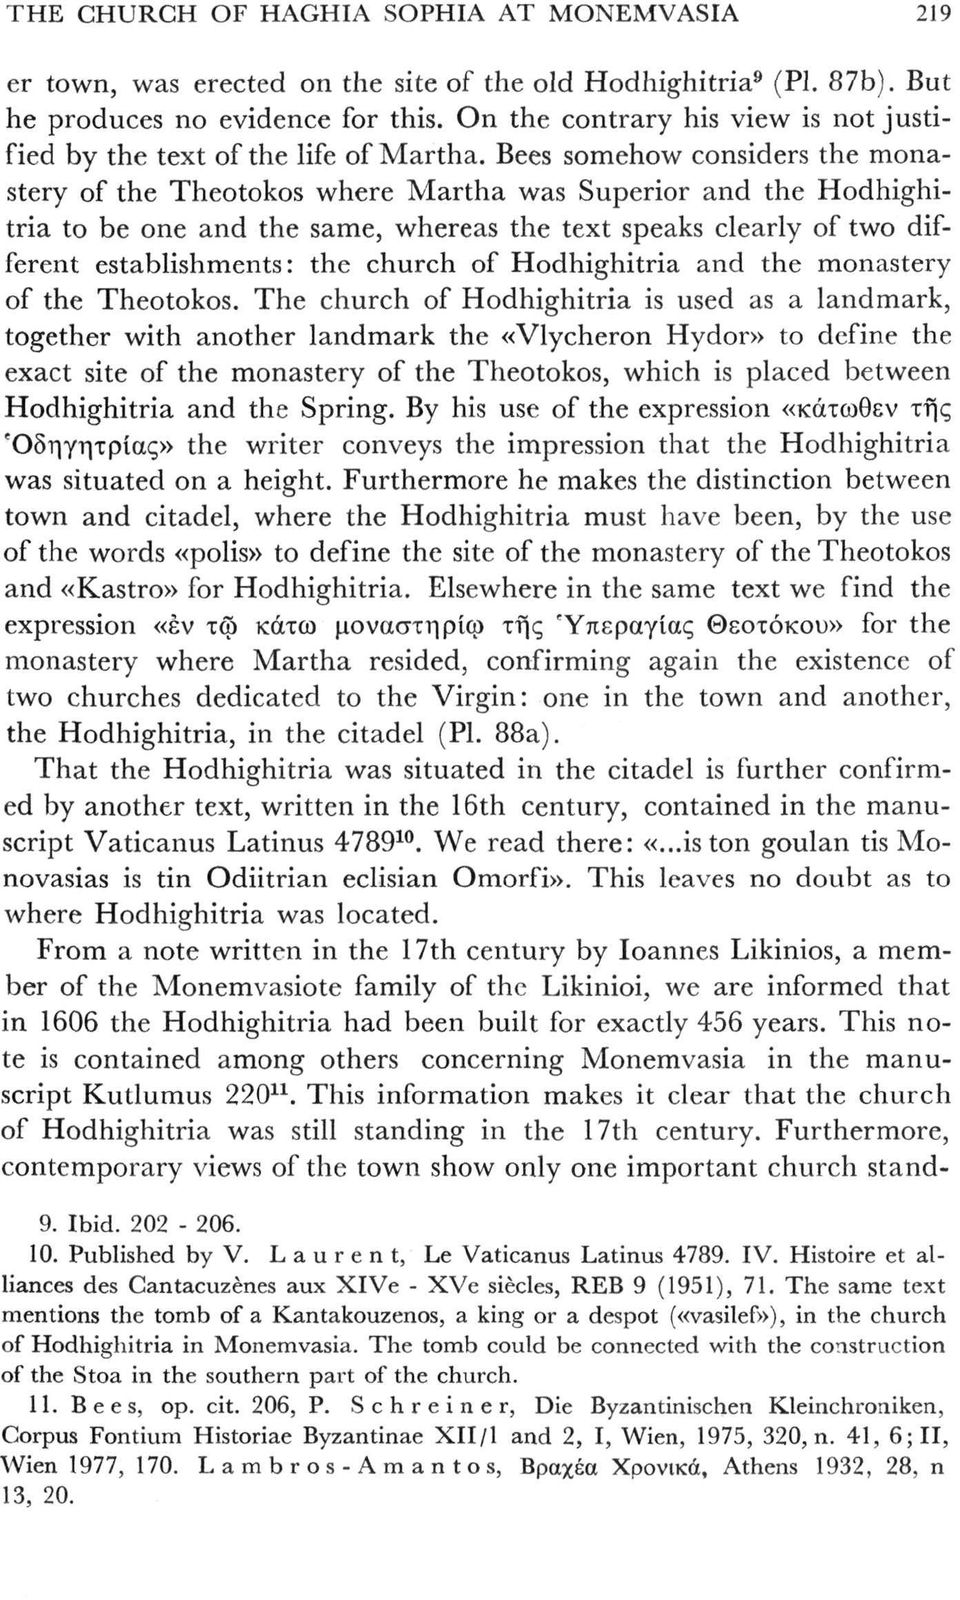 Bees somehow considers the monastery of the Theotokos where Martha was Superior and the Hodhighitria to be one and the same, whereas the text speaks clearly of two different establishments: the